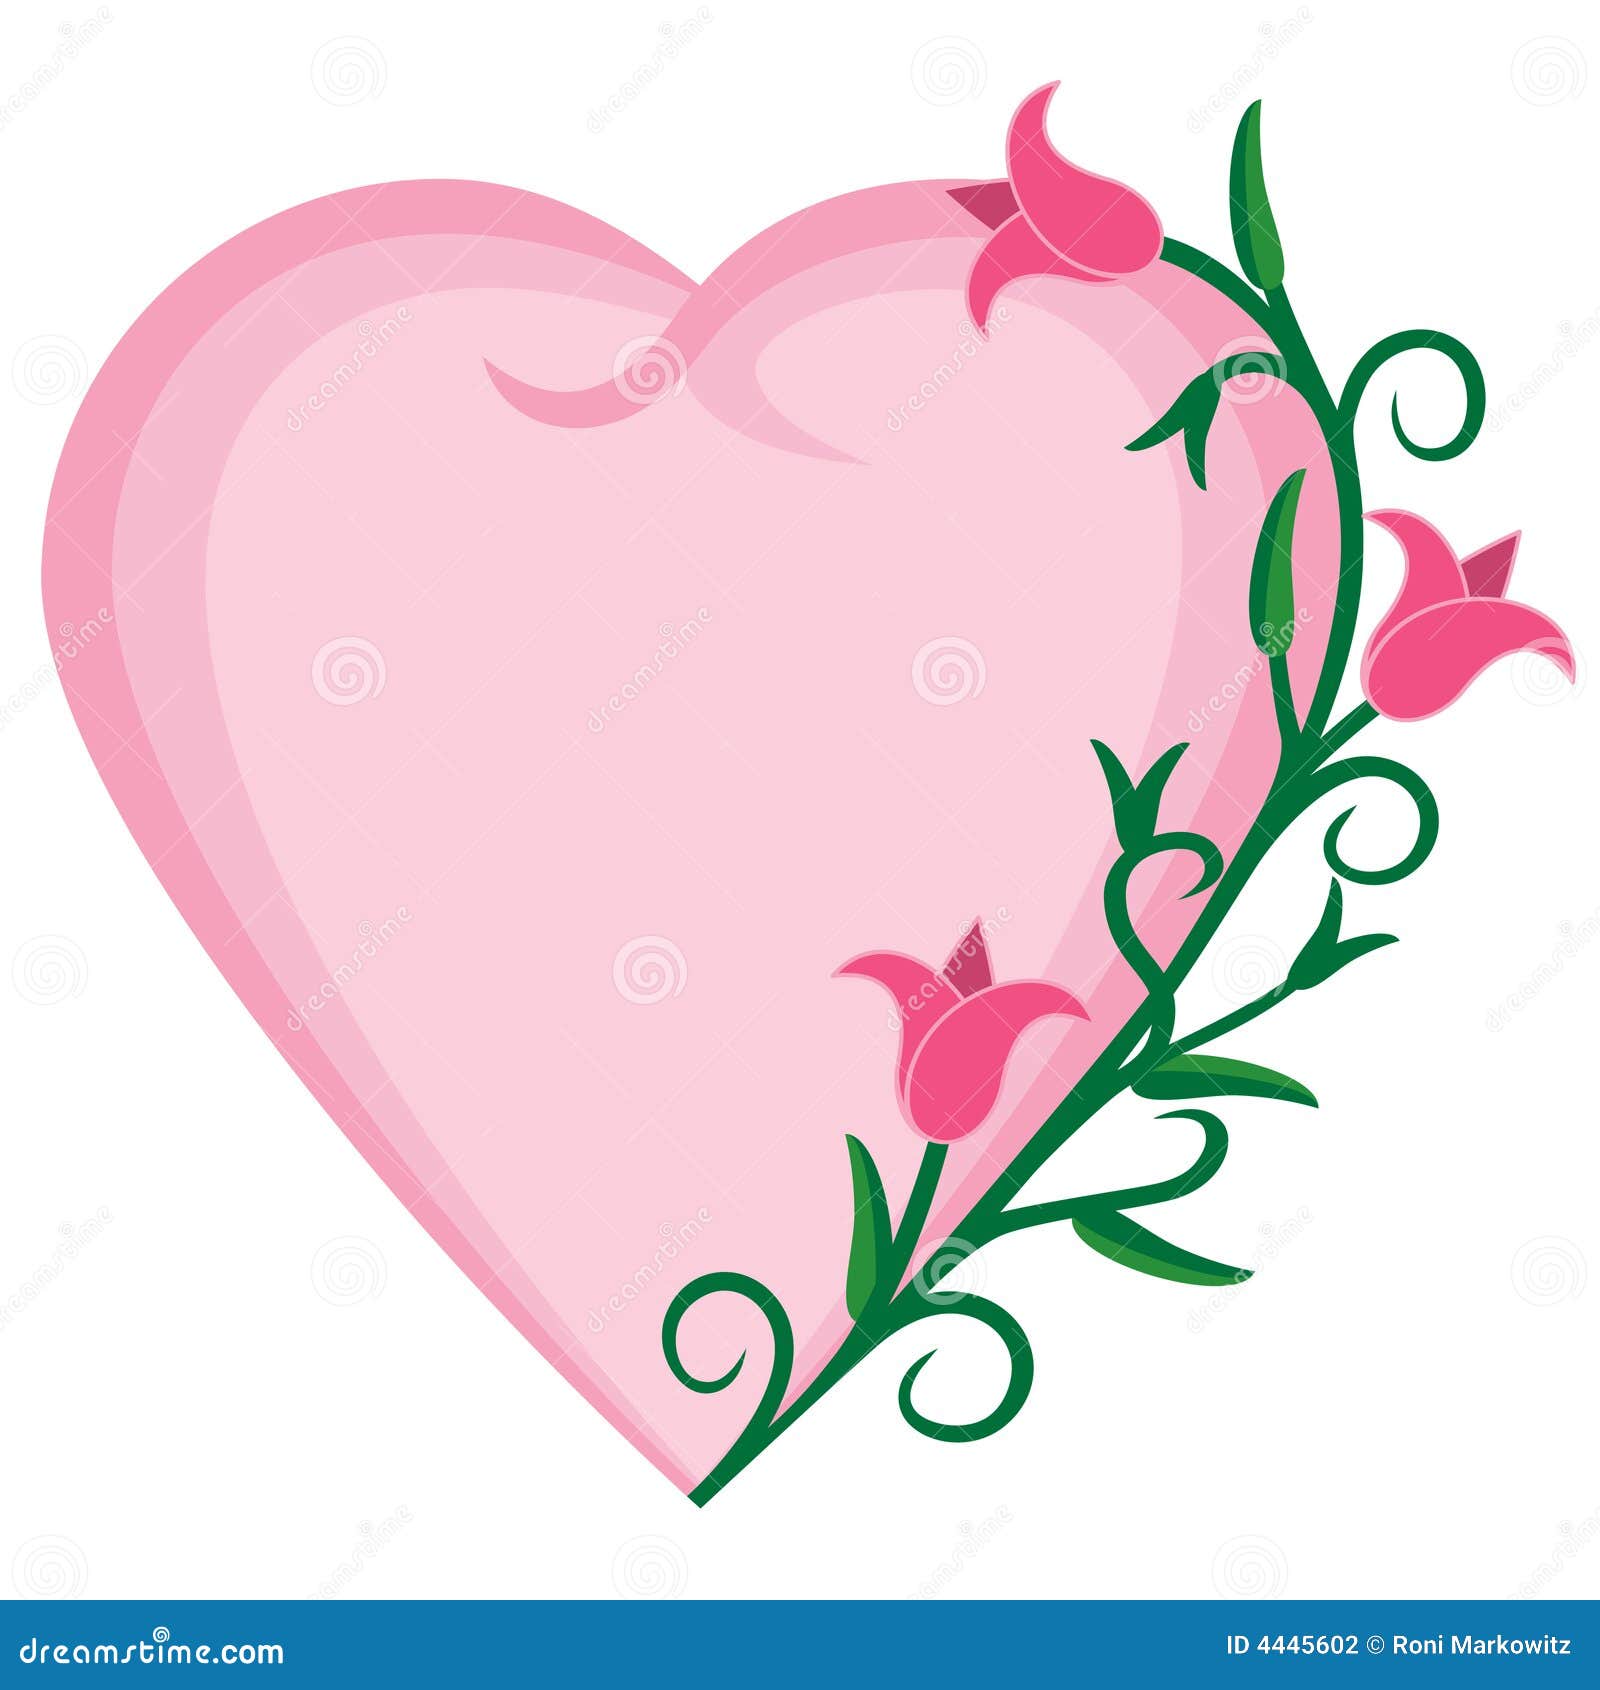 hearts and flowers Heart-flowers.jpg